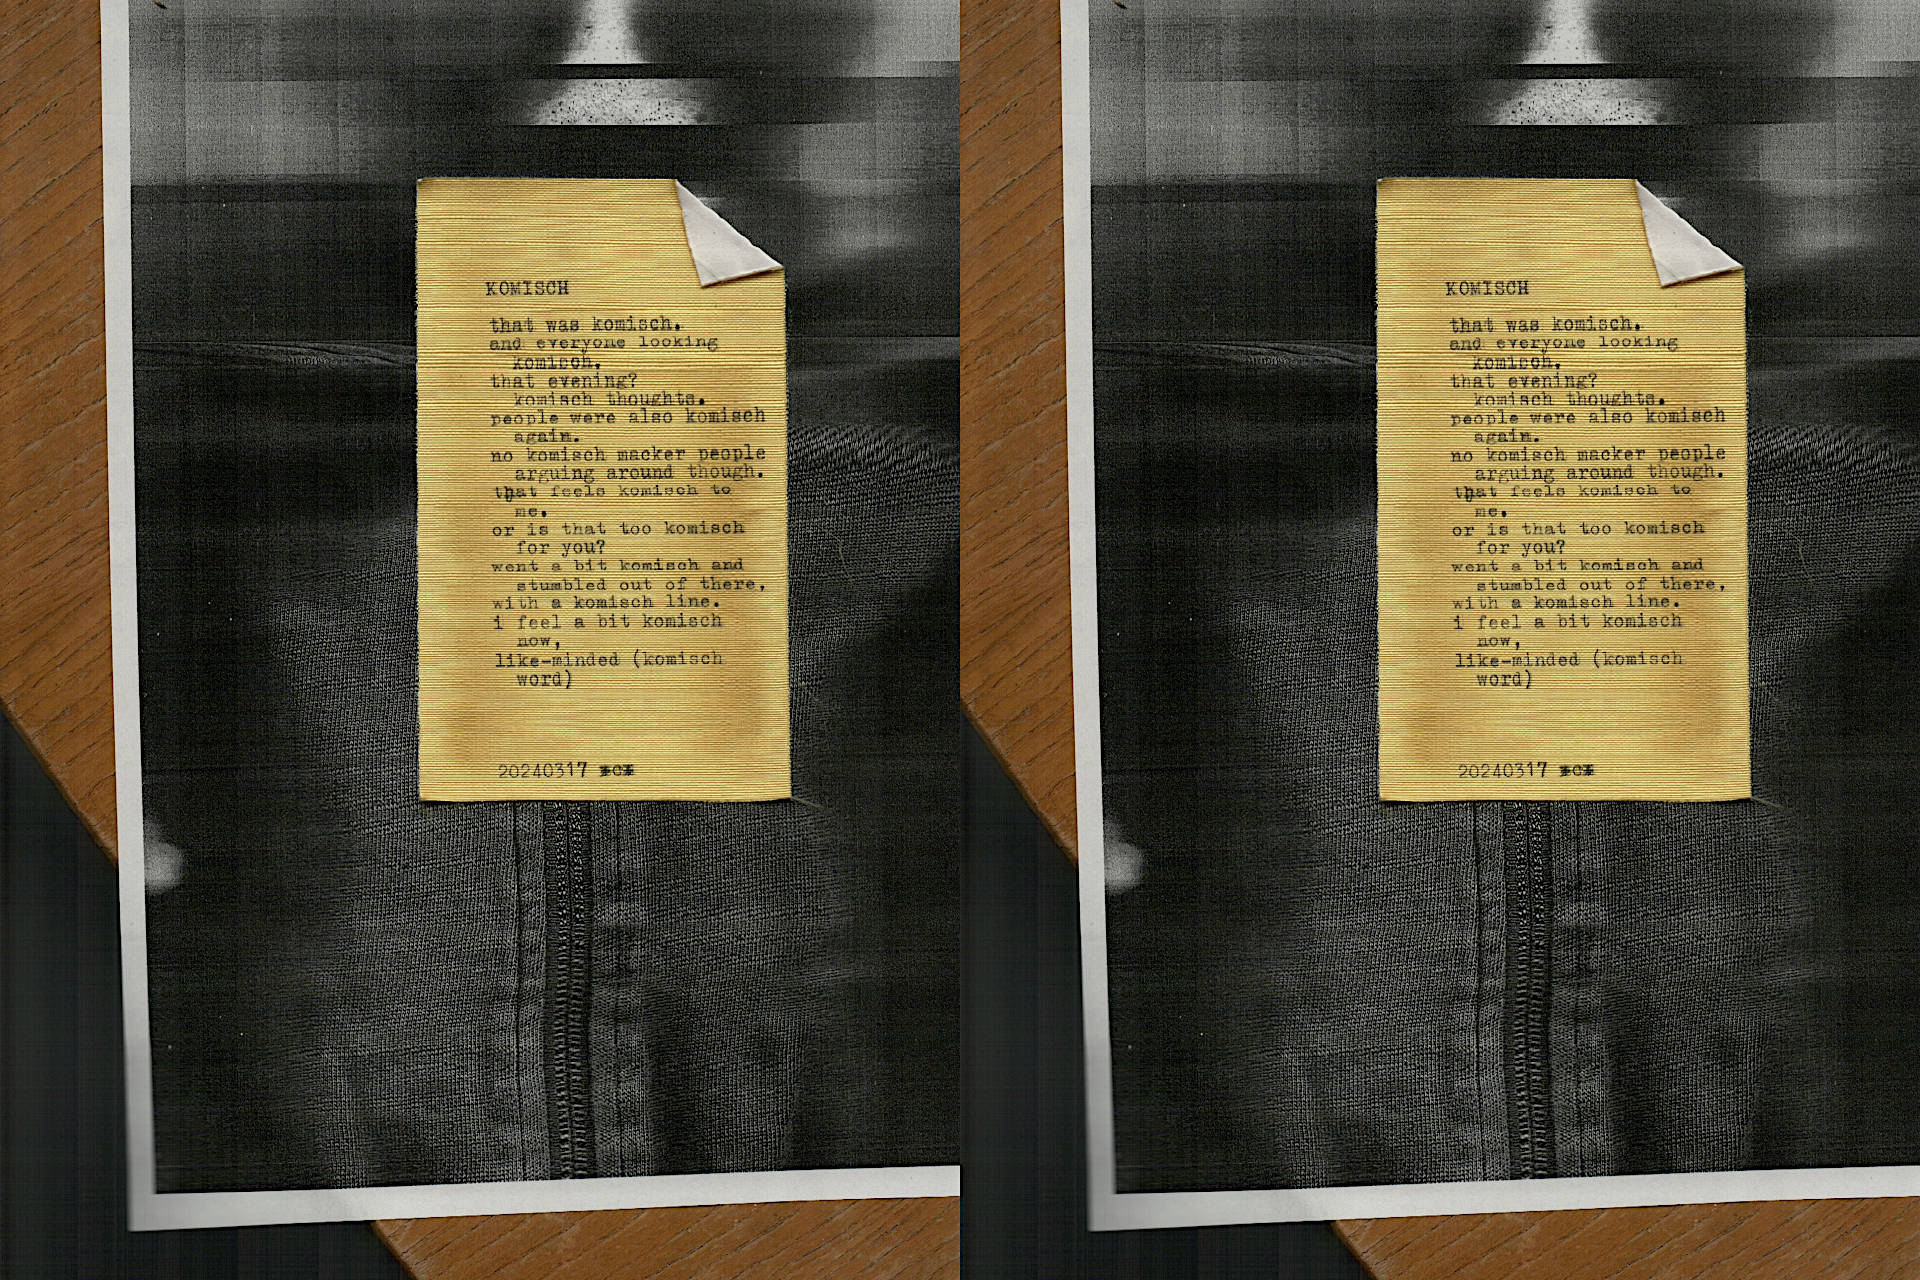 typescript of the poem on a printed copy of a humans chest in a hoodie zip sweater. the poem is written on shiny golden silk paper.